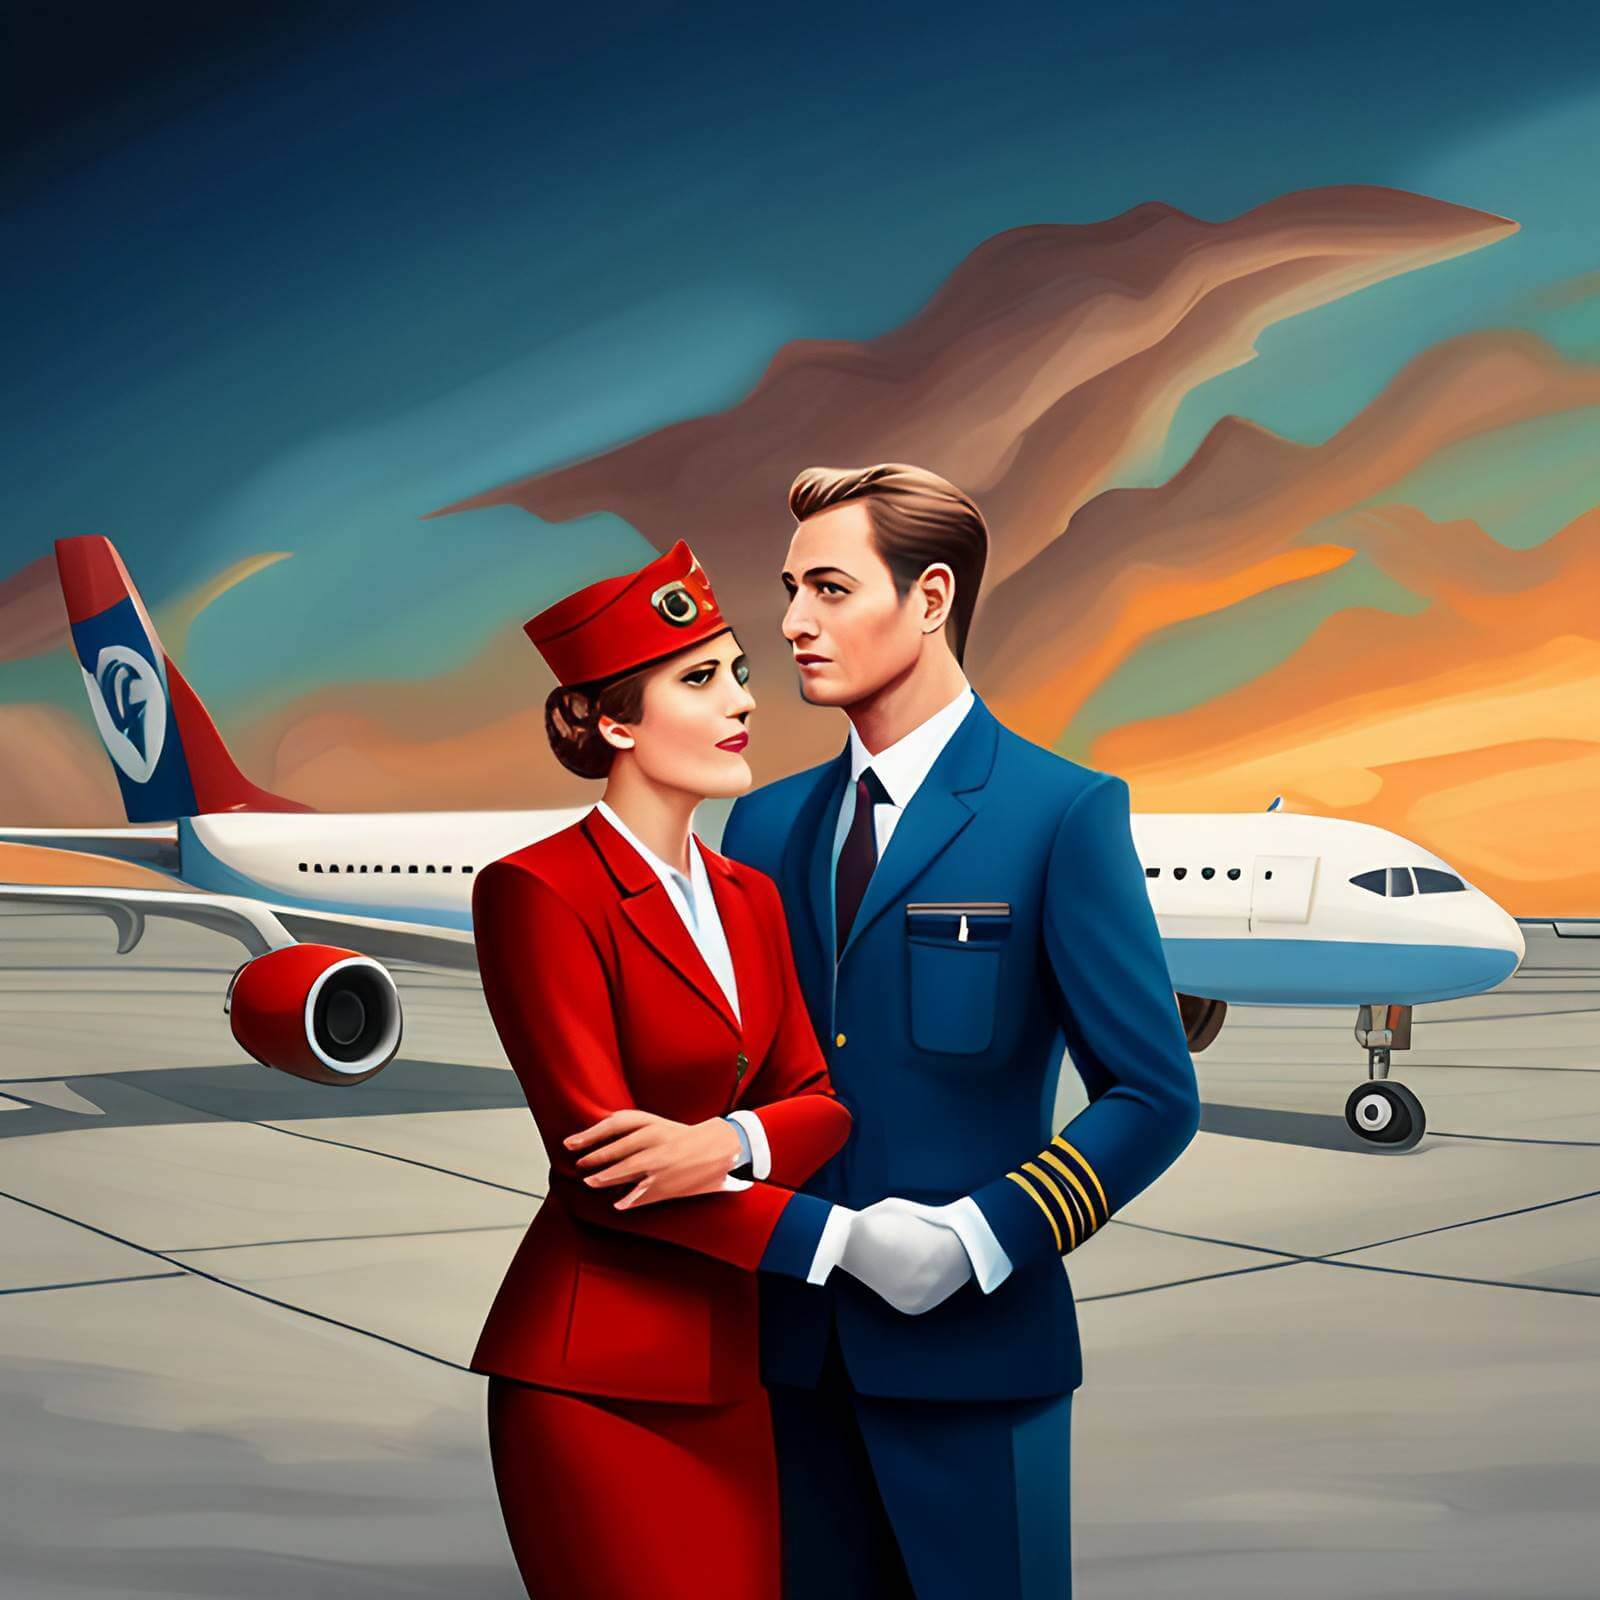 pros and cons of dating a flight attendant